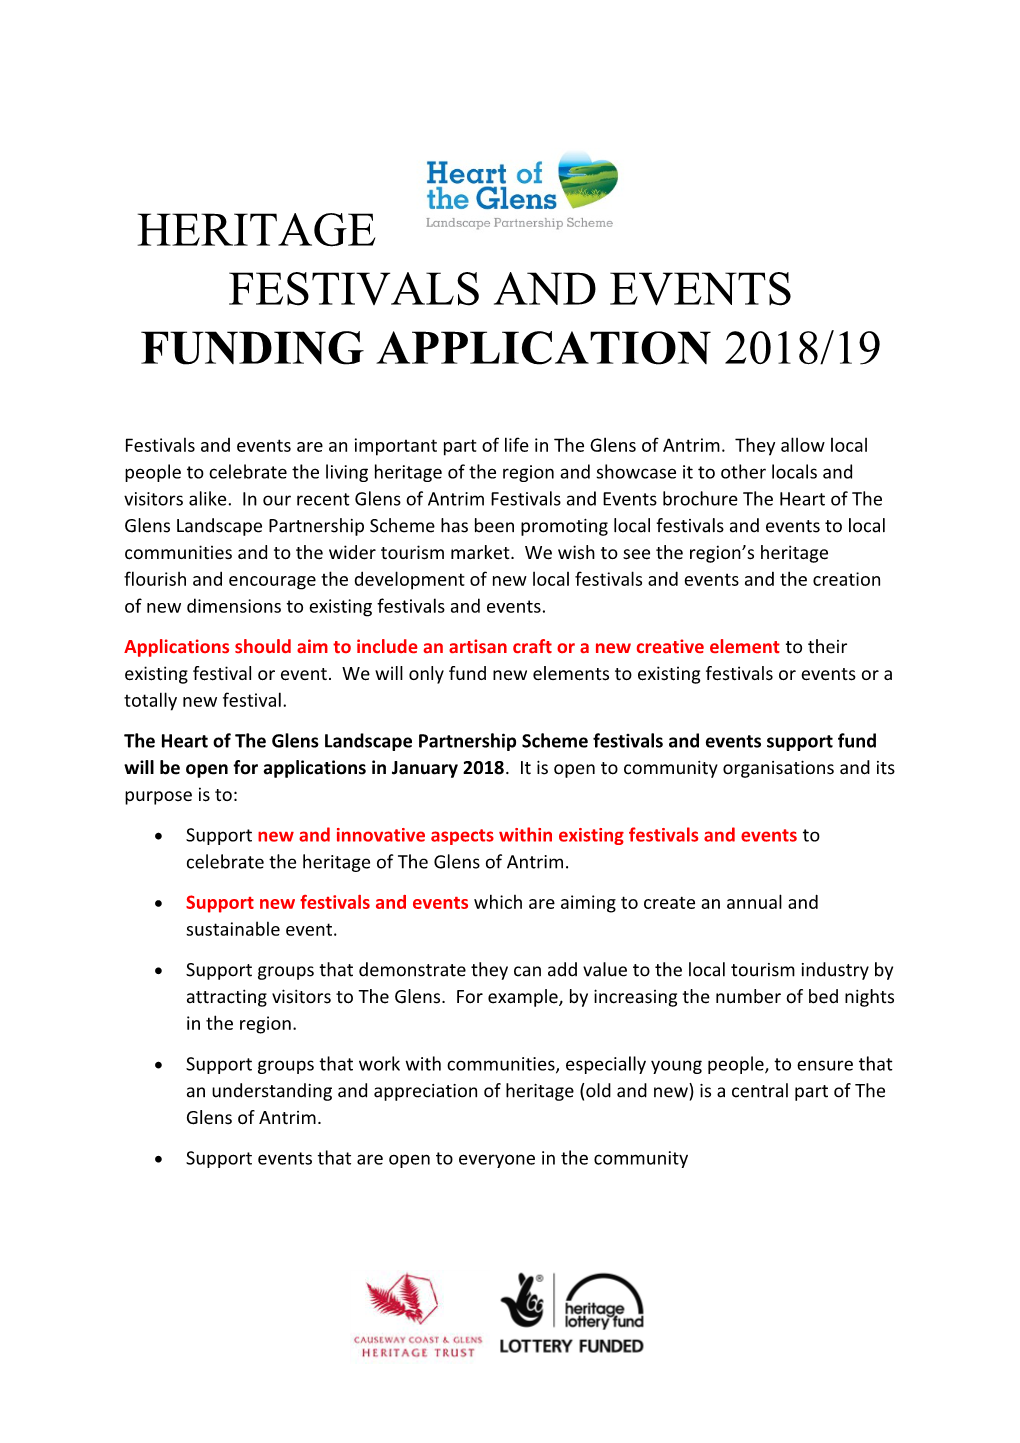 Heritage Festivals and Events Funding Application 2018/19